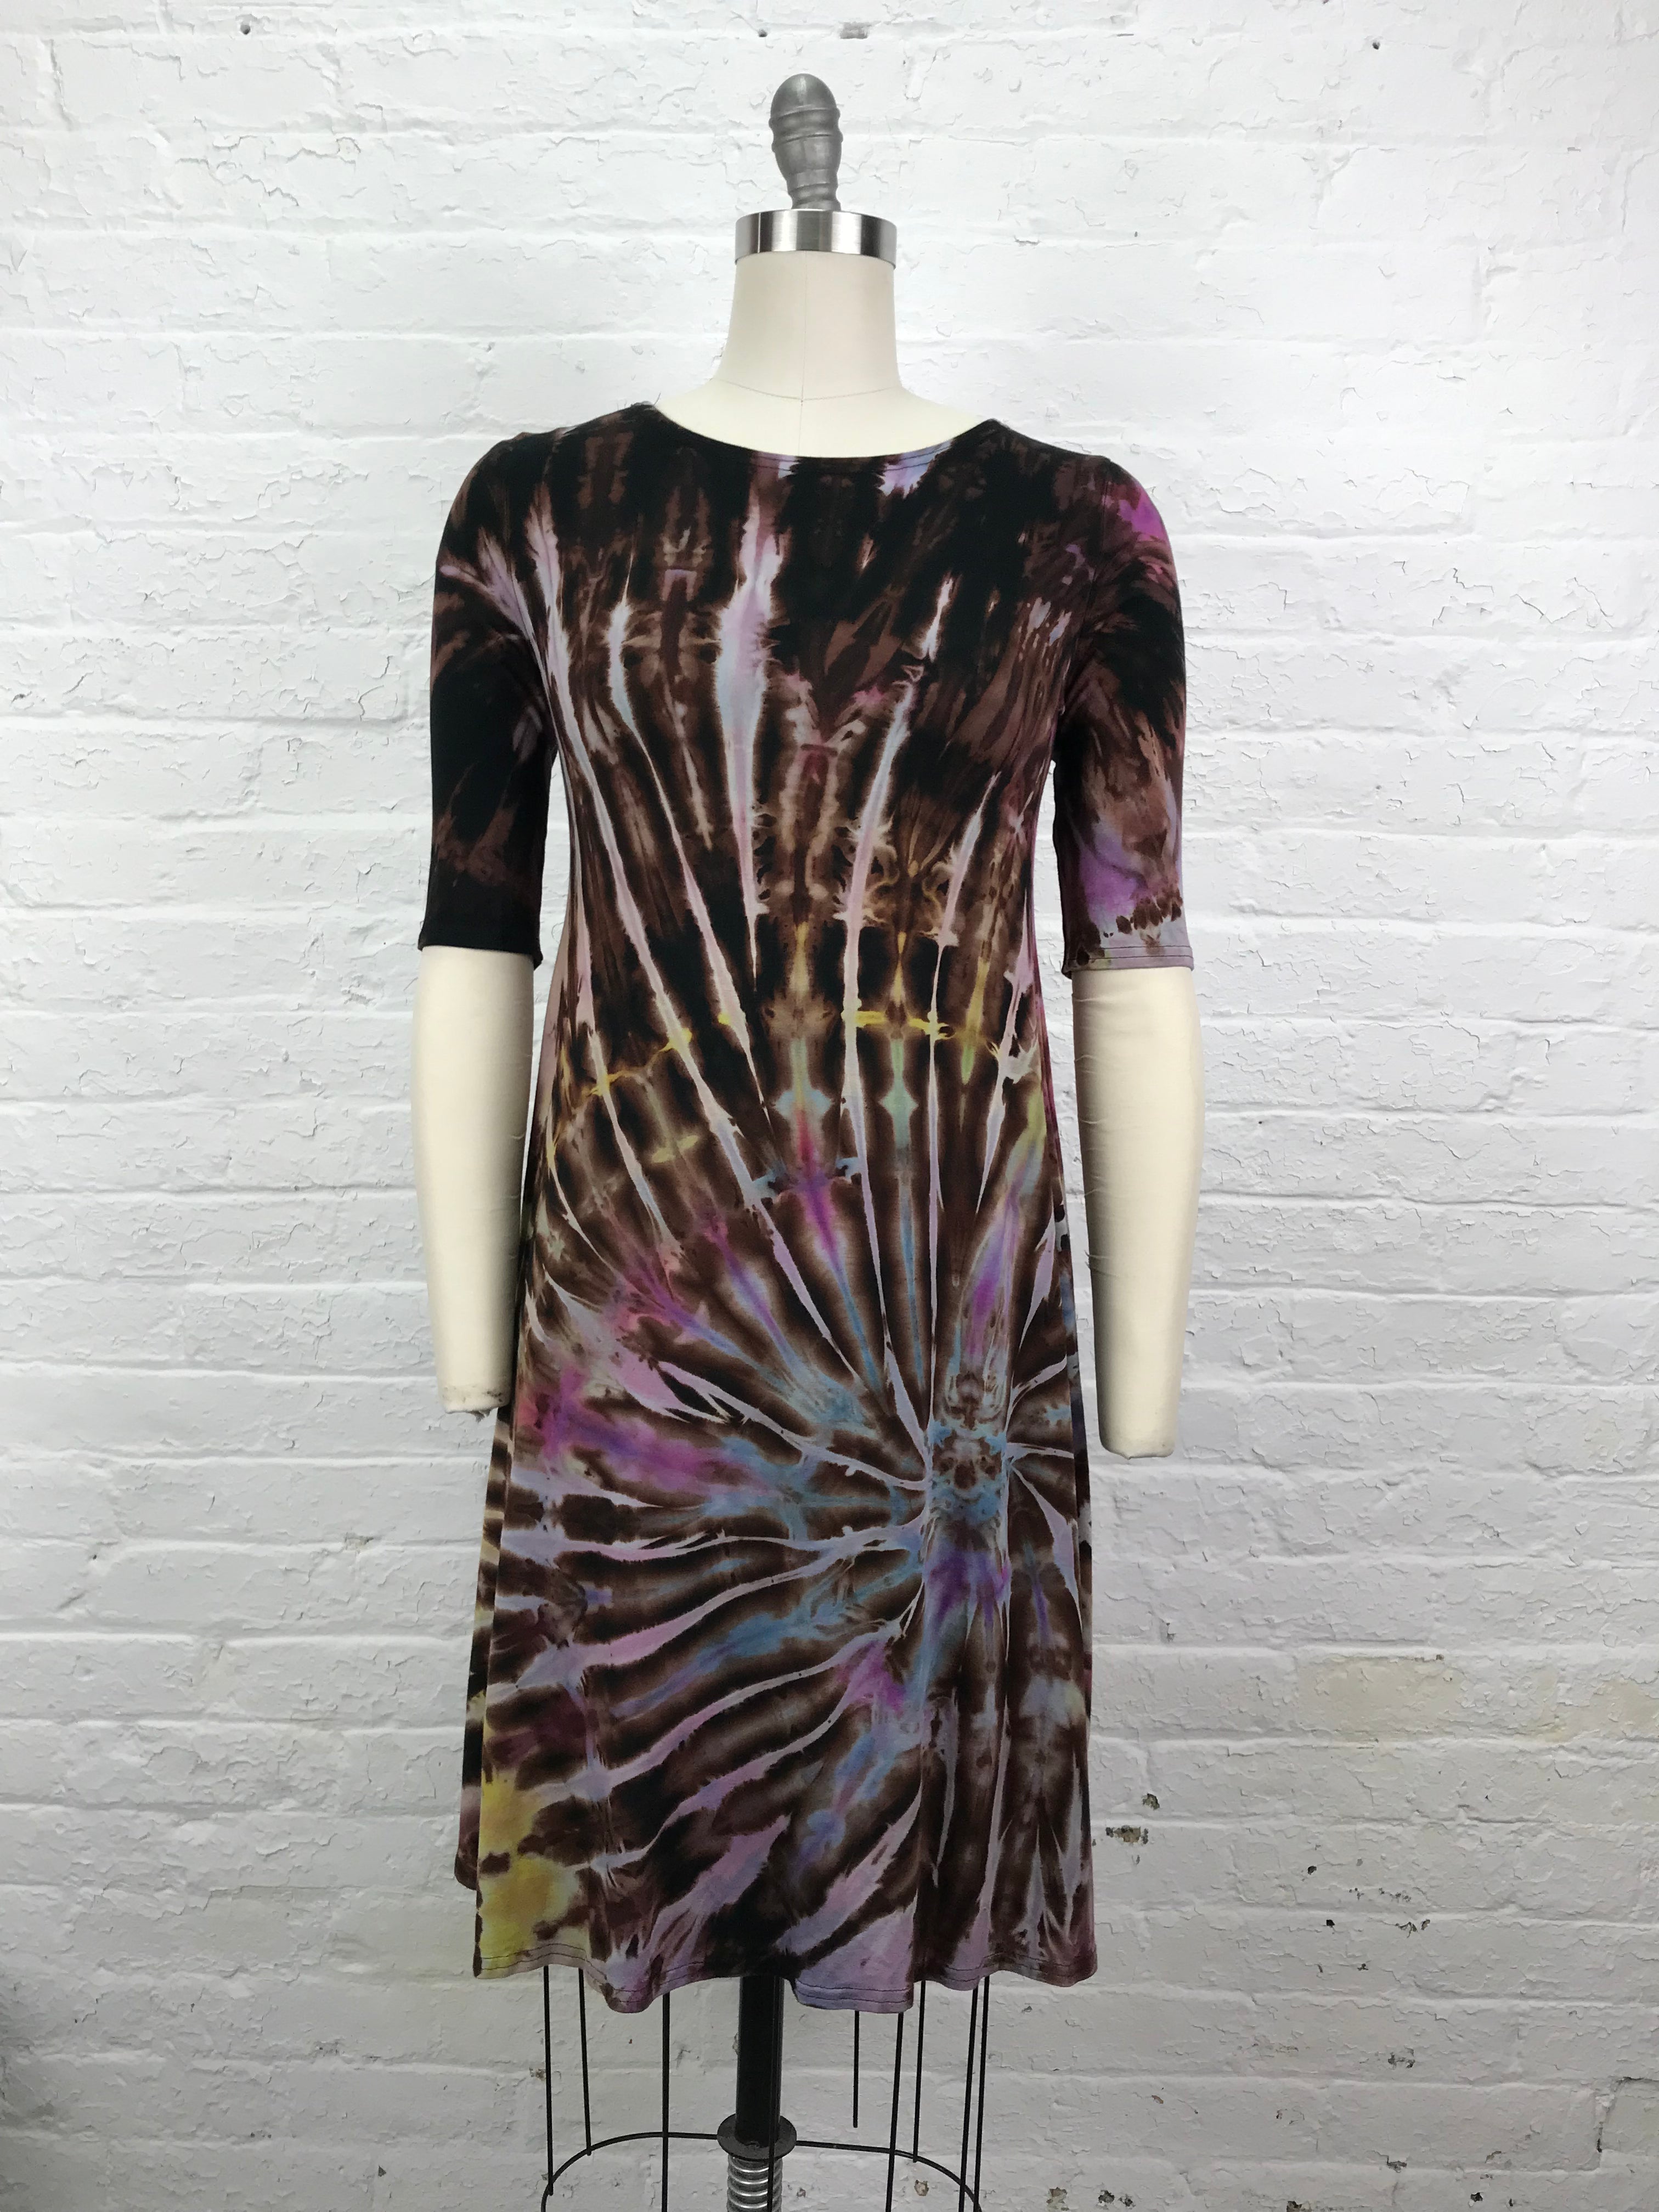 Sustainably chic elegant tie dye dress by Moon Tide Dyers – Cloud Candy